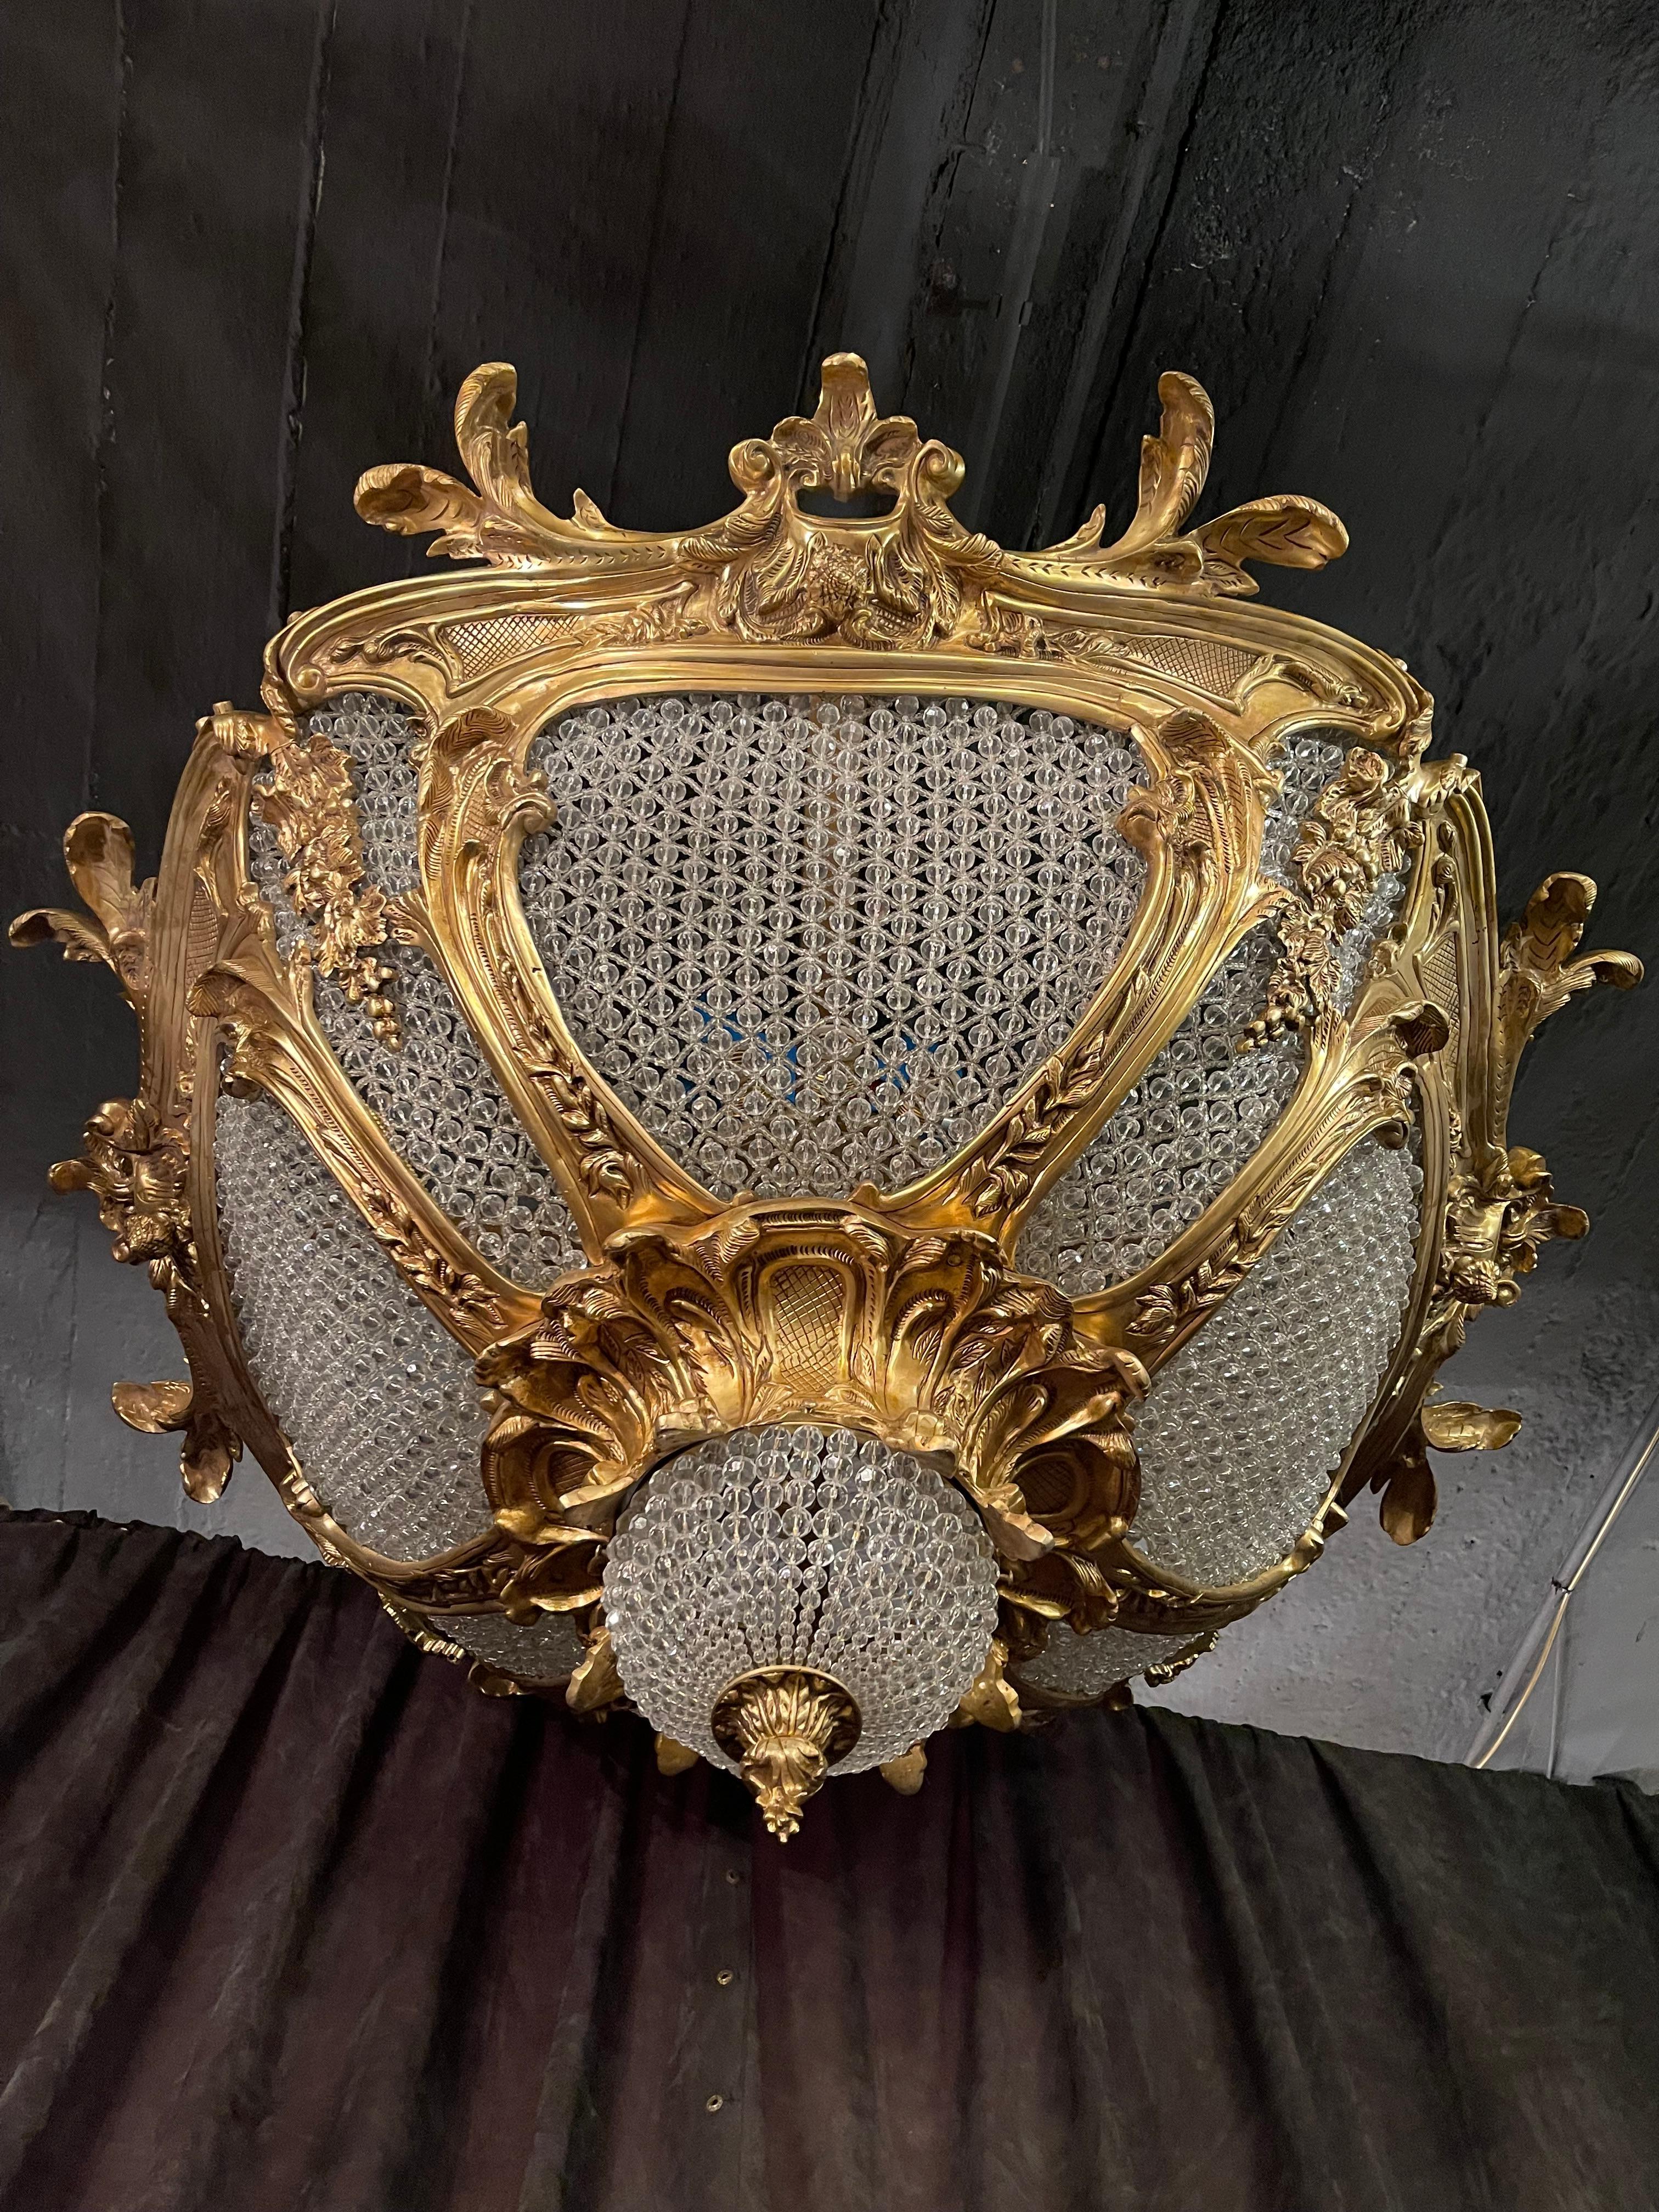 Monumental highly significant candelabra in Louis XV style.
Unusual, finely engraved and cast bronze. Balustrade formed, profile-framed corpus connected with wide, ornamental reliefed, hoops, crowned by sunbeams. On the wide hoop, can be found